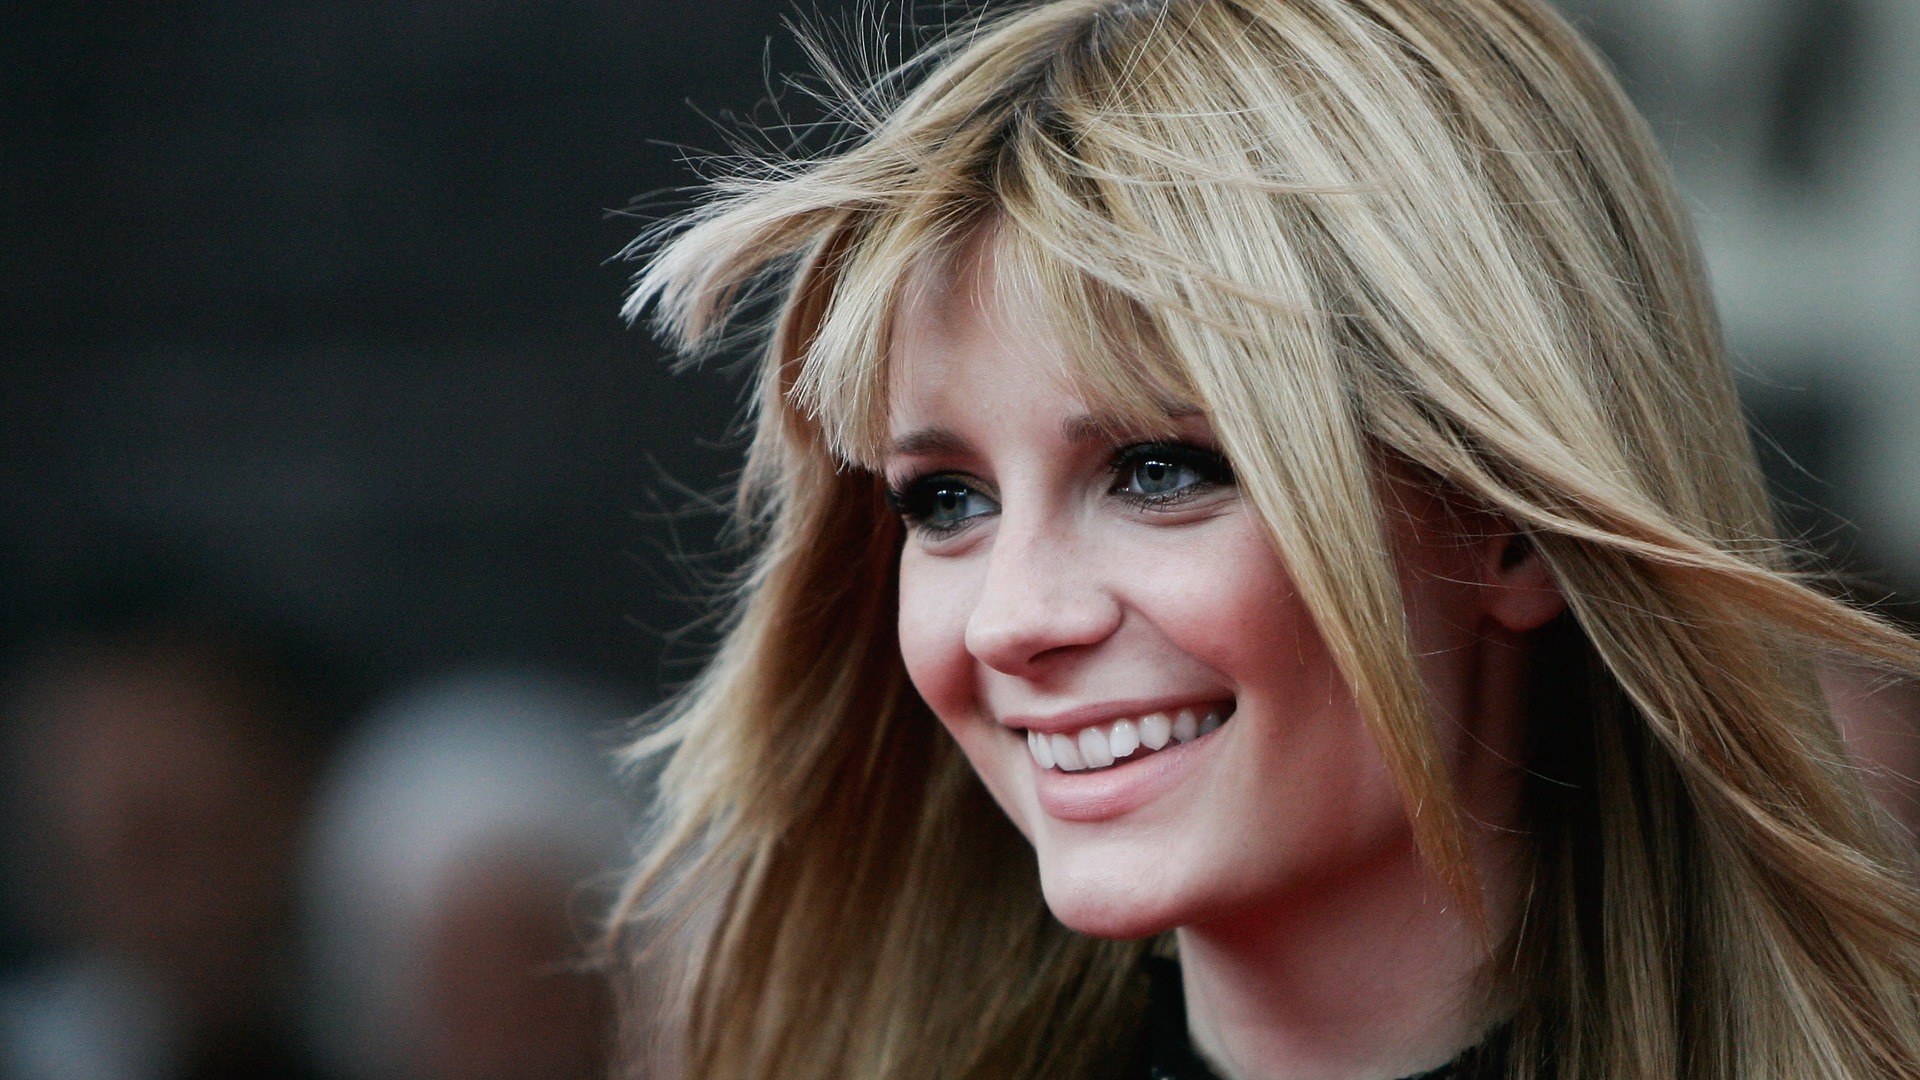 Mischa Barton #023 - 1920x1080 Wallpapers Pictures Photos Images